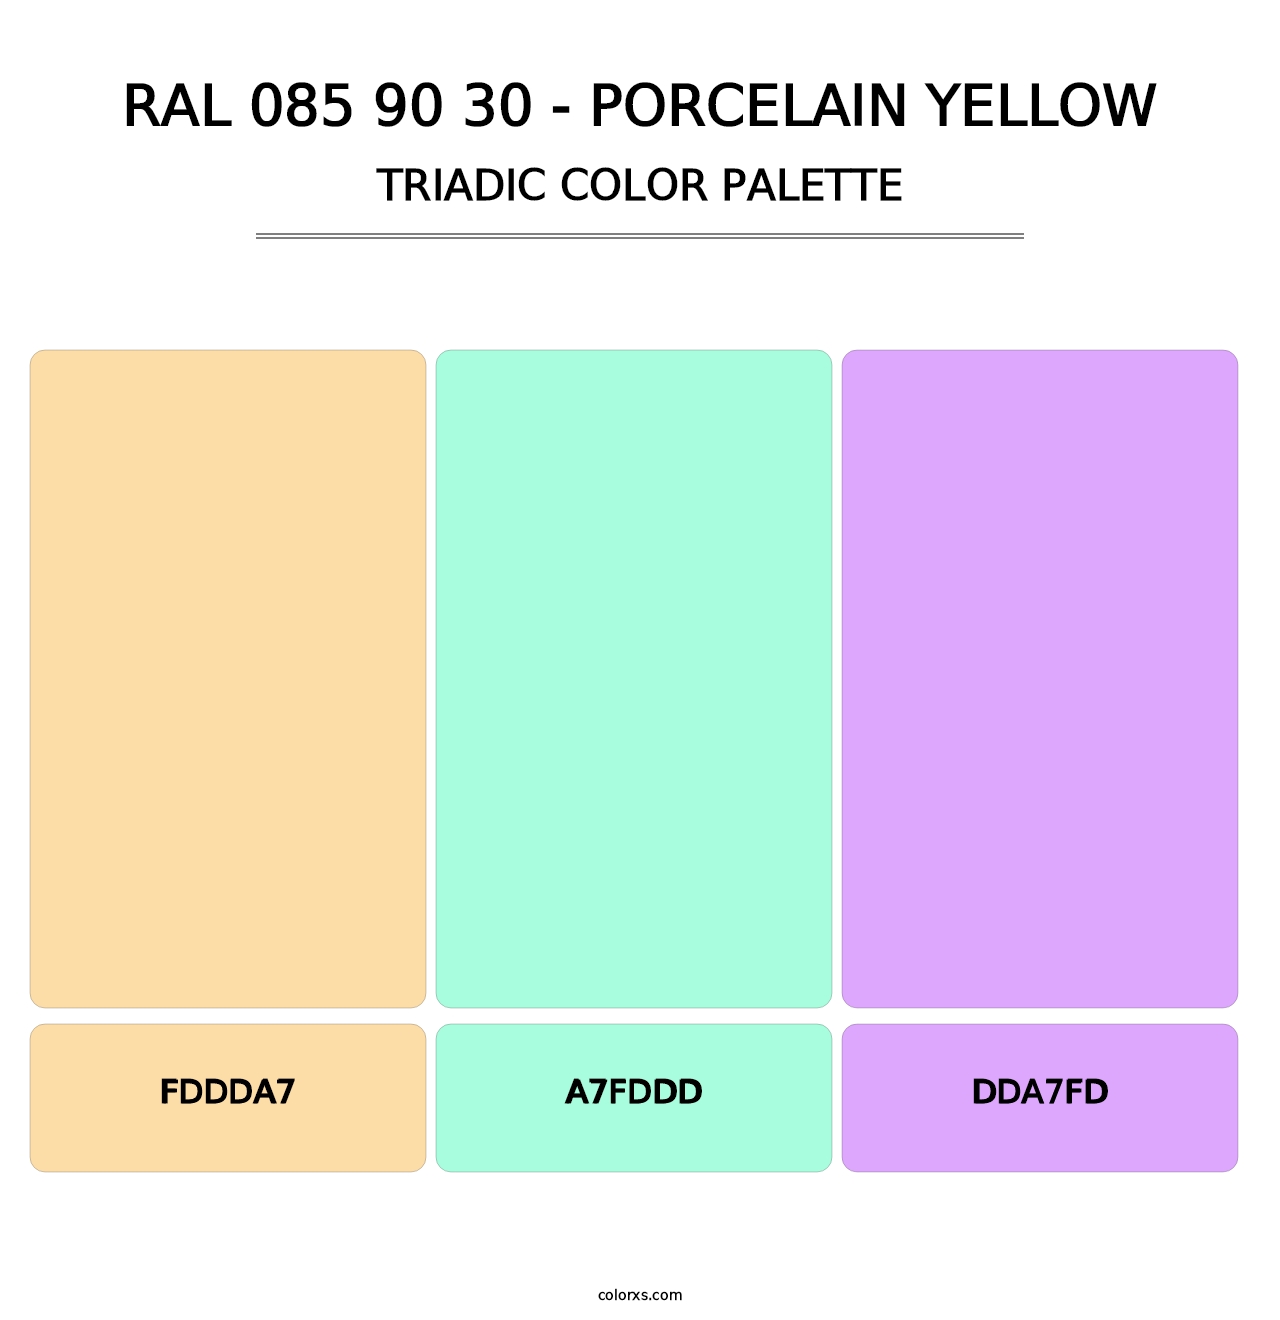 RAL 085 90 30 - Porcelain Yellow - Triadic Color Palette